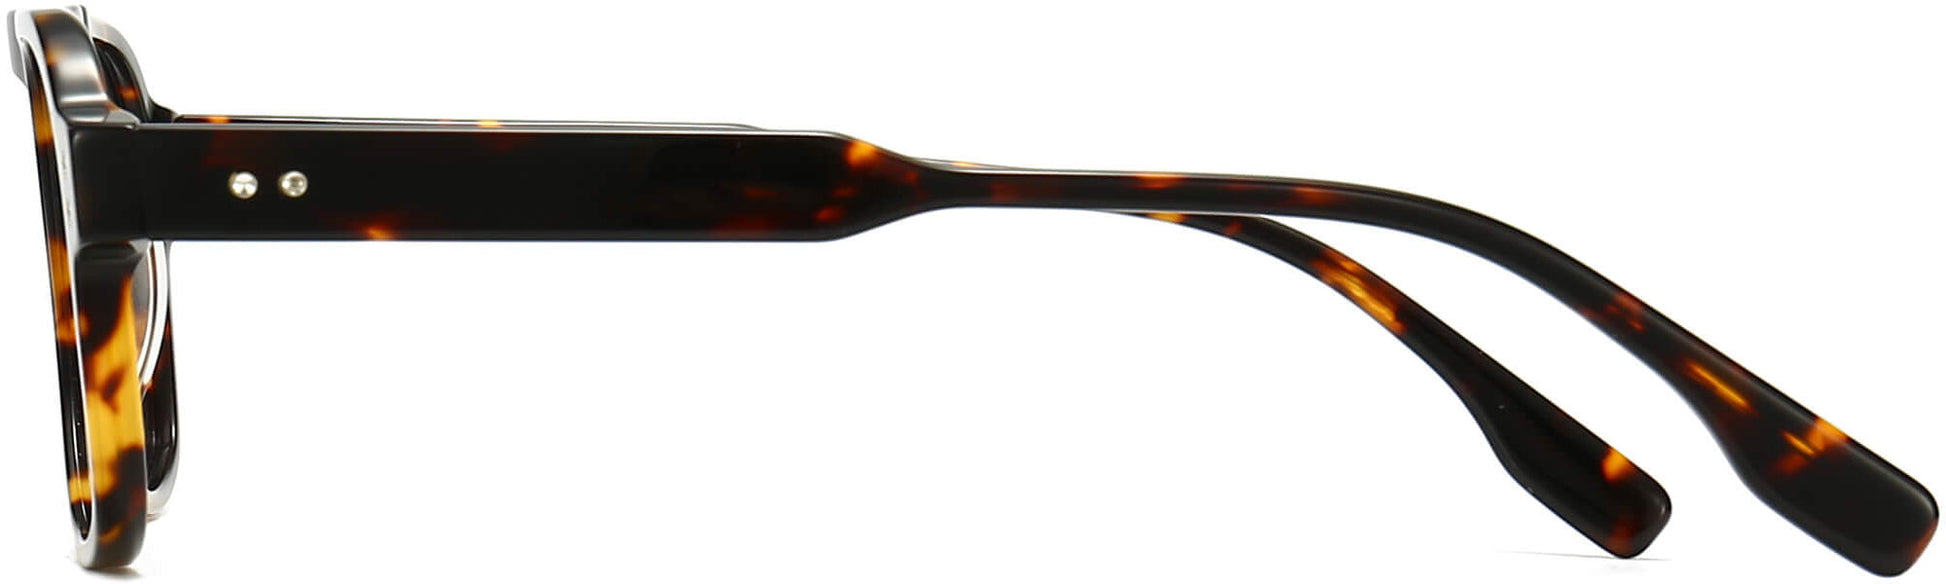 Rayan Round Tortoise Eyeglasses from ANRRI, side view